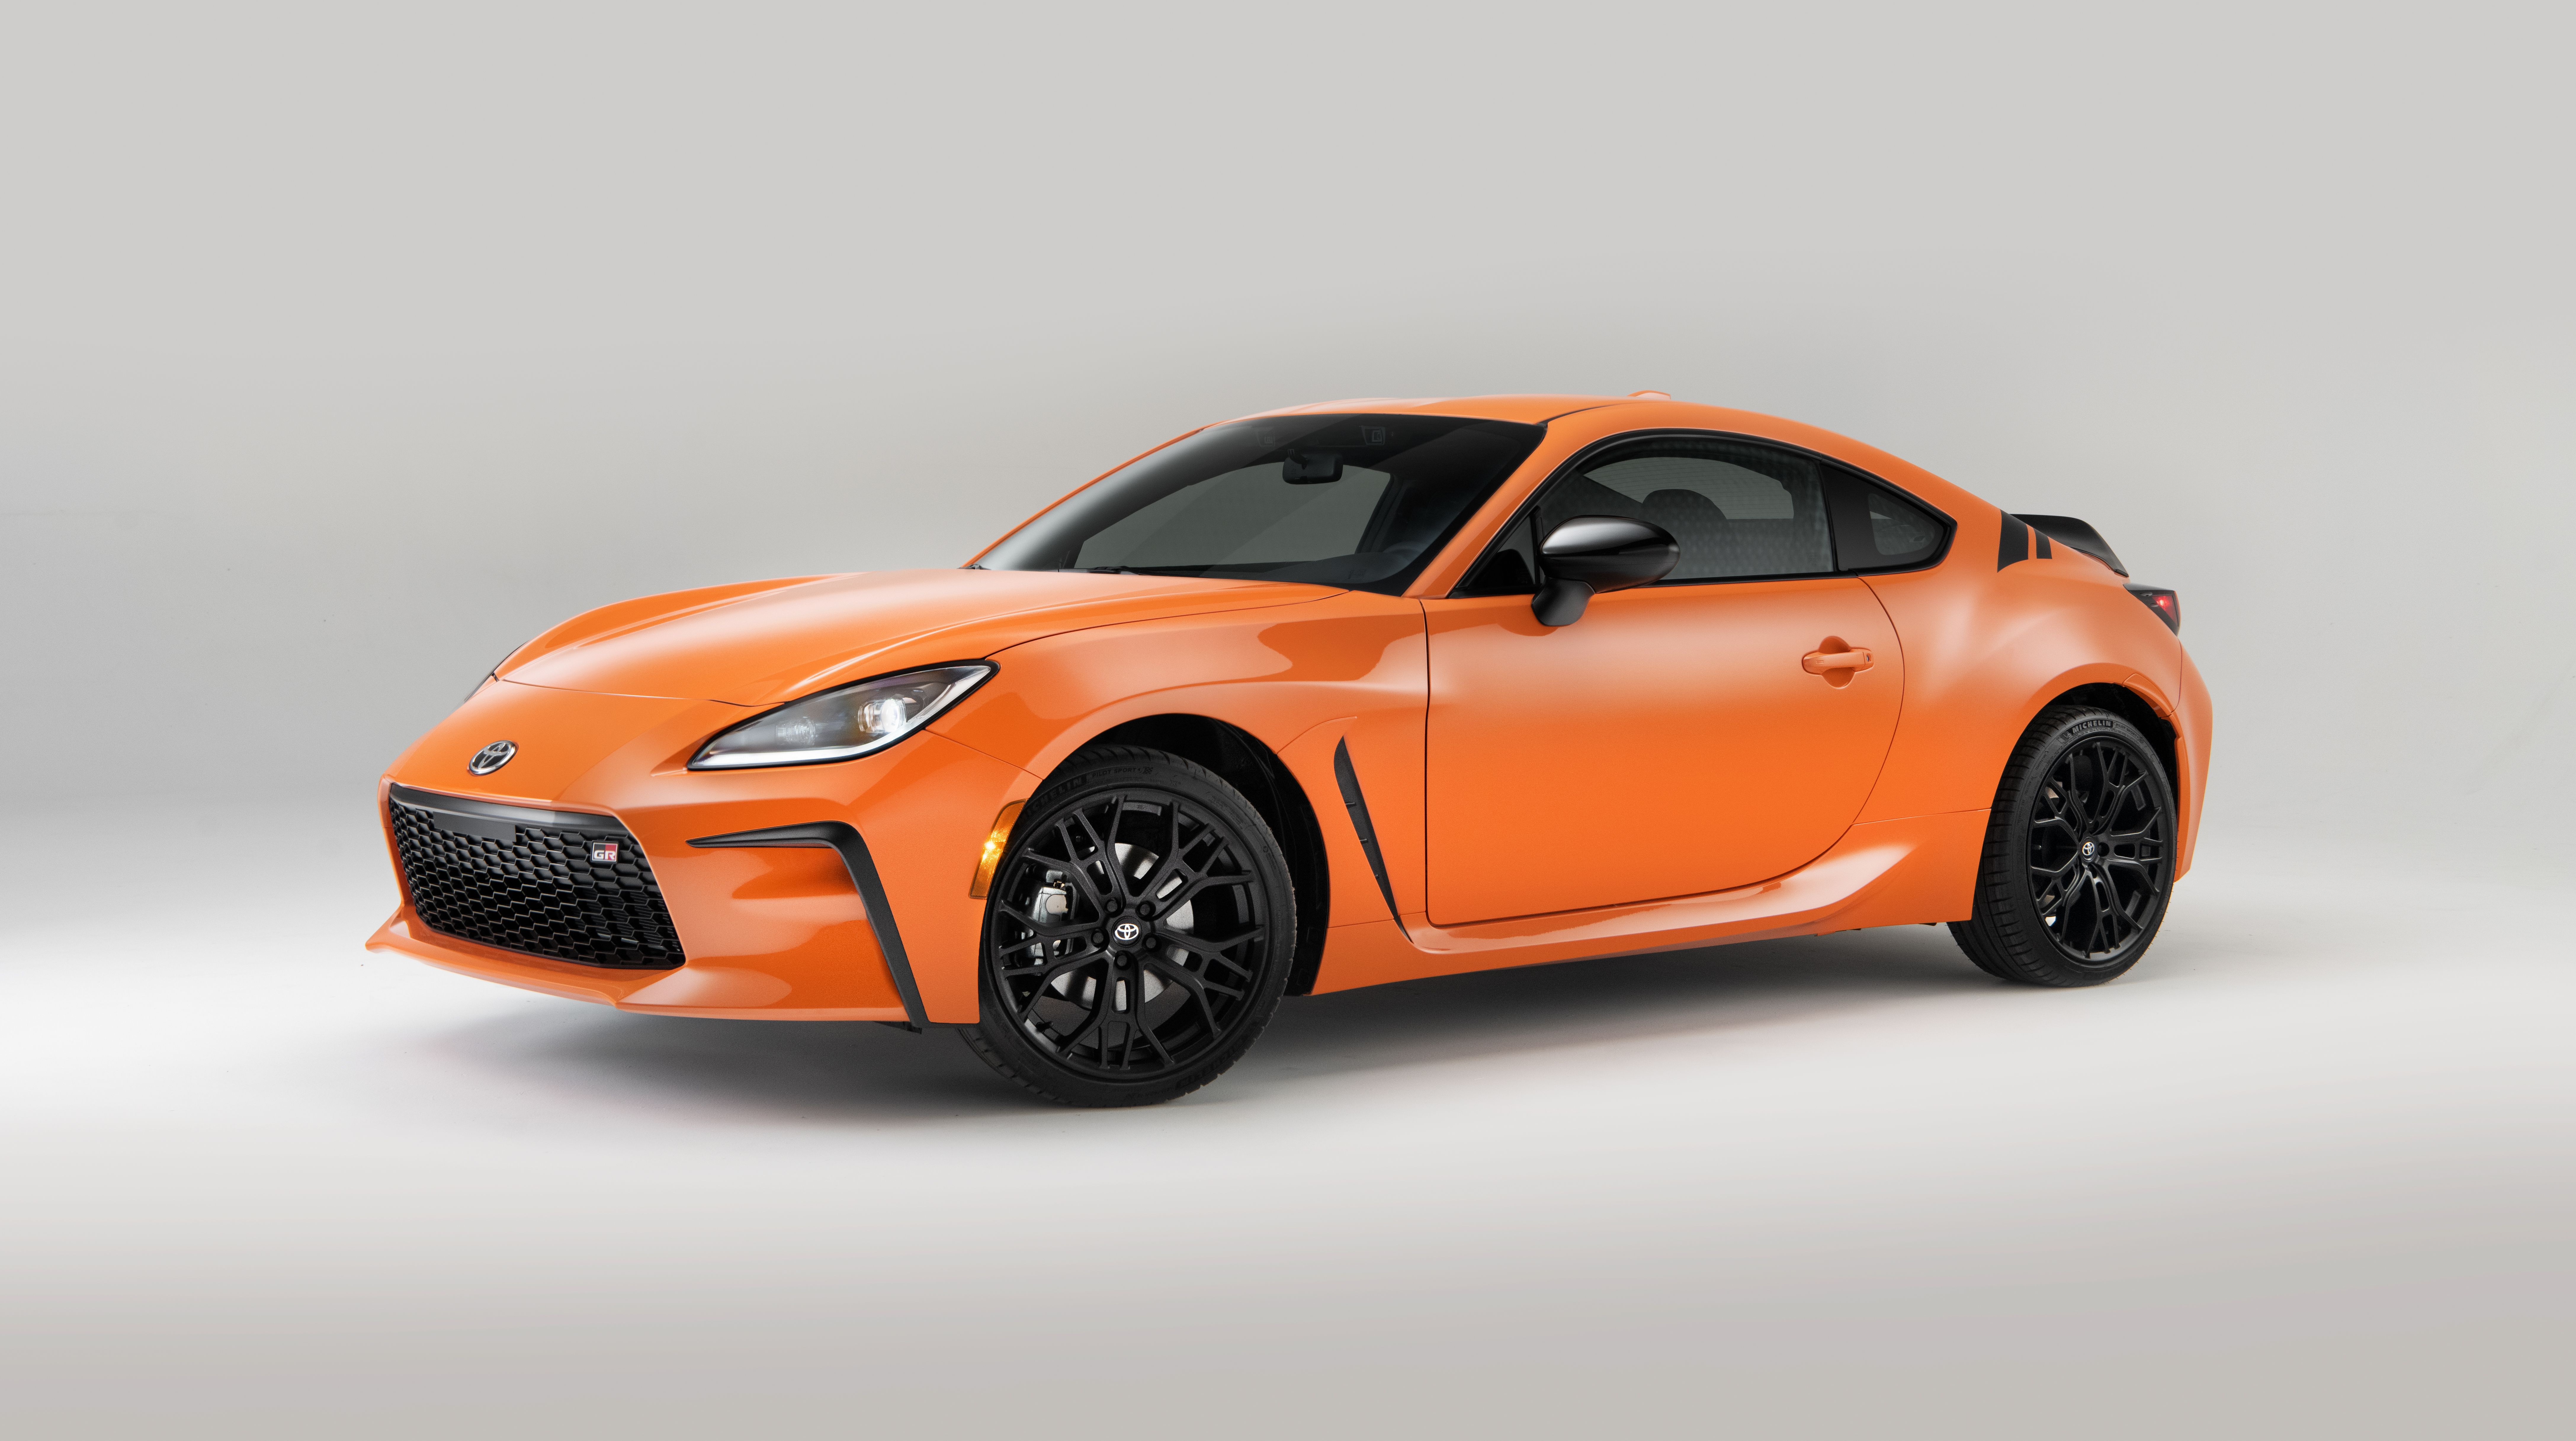 The 2023 Toyota GR86 Special Edition painted in orange